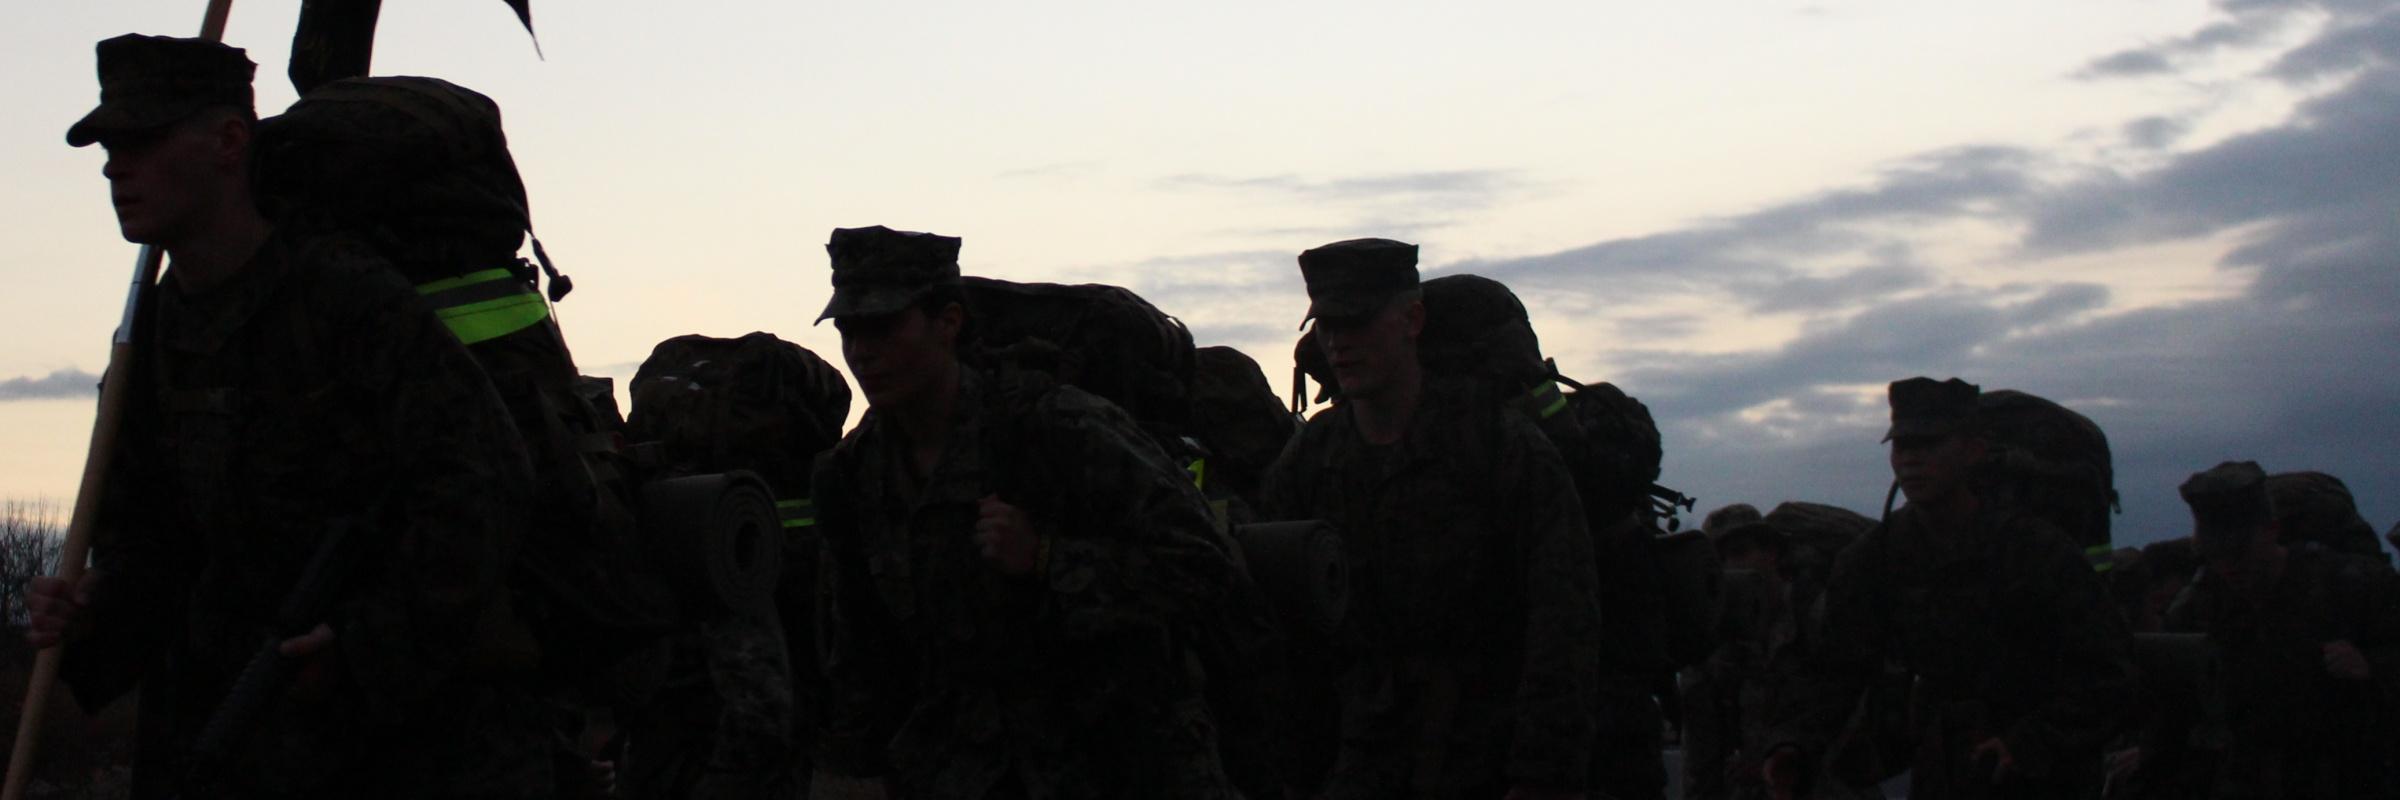 A group of midshipmen with weighted packs, on a hike, are silhouetted in front of the dawn sky.